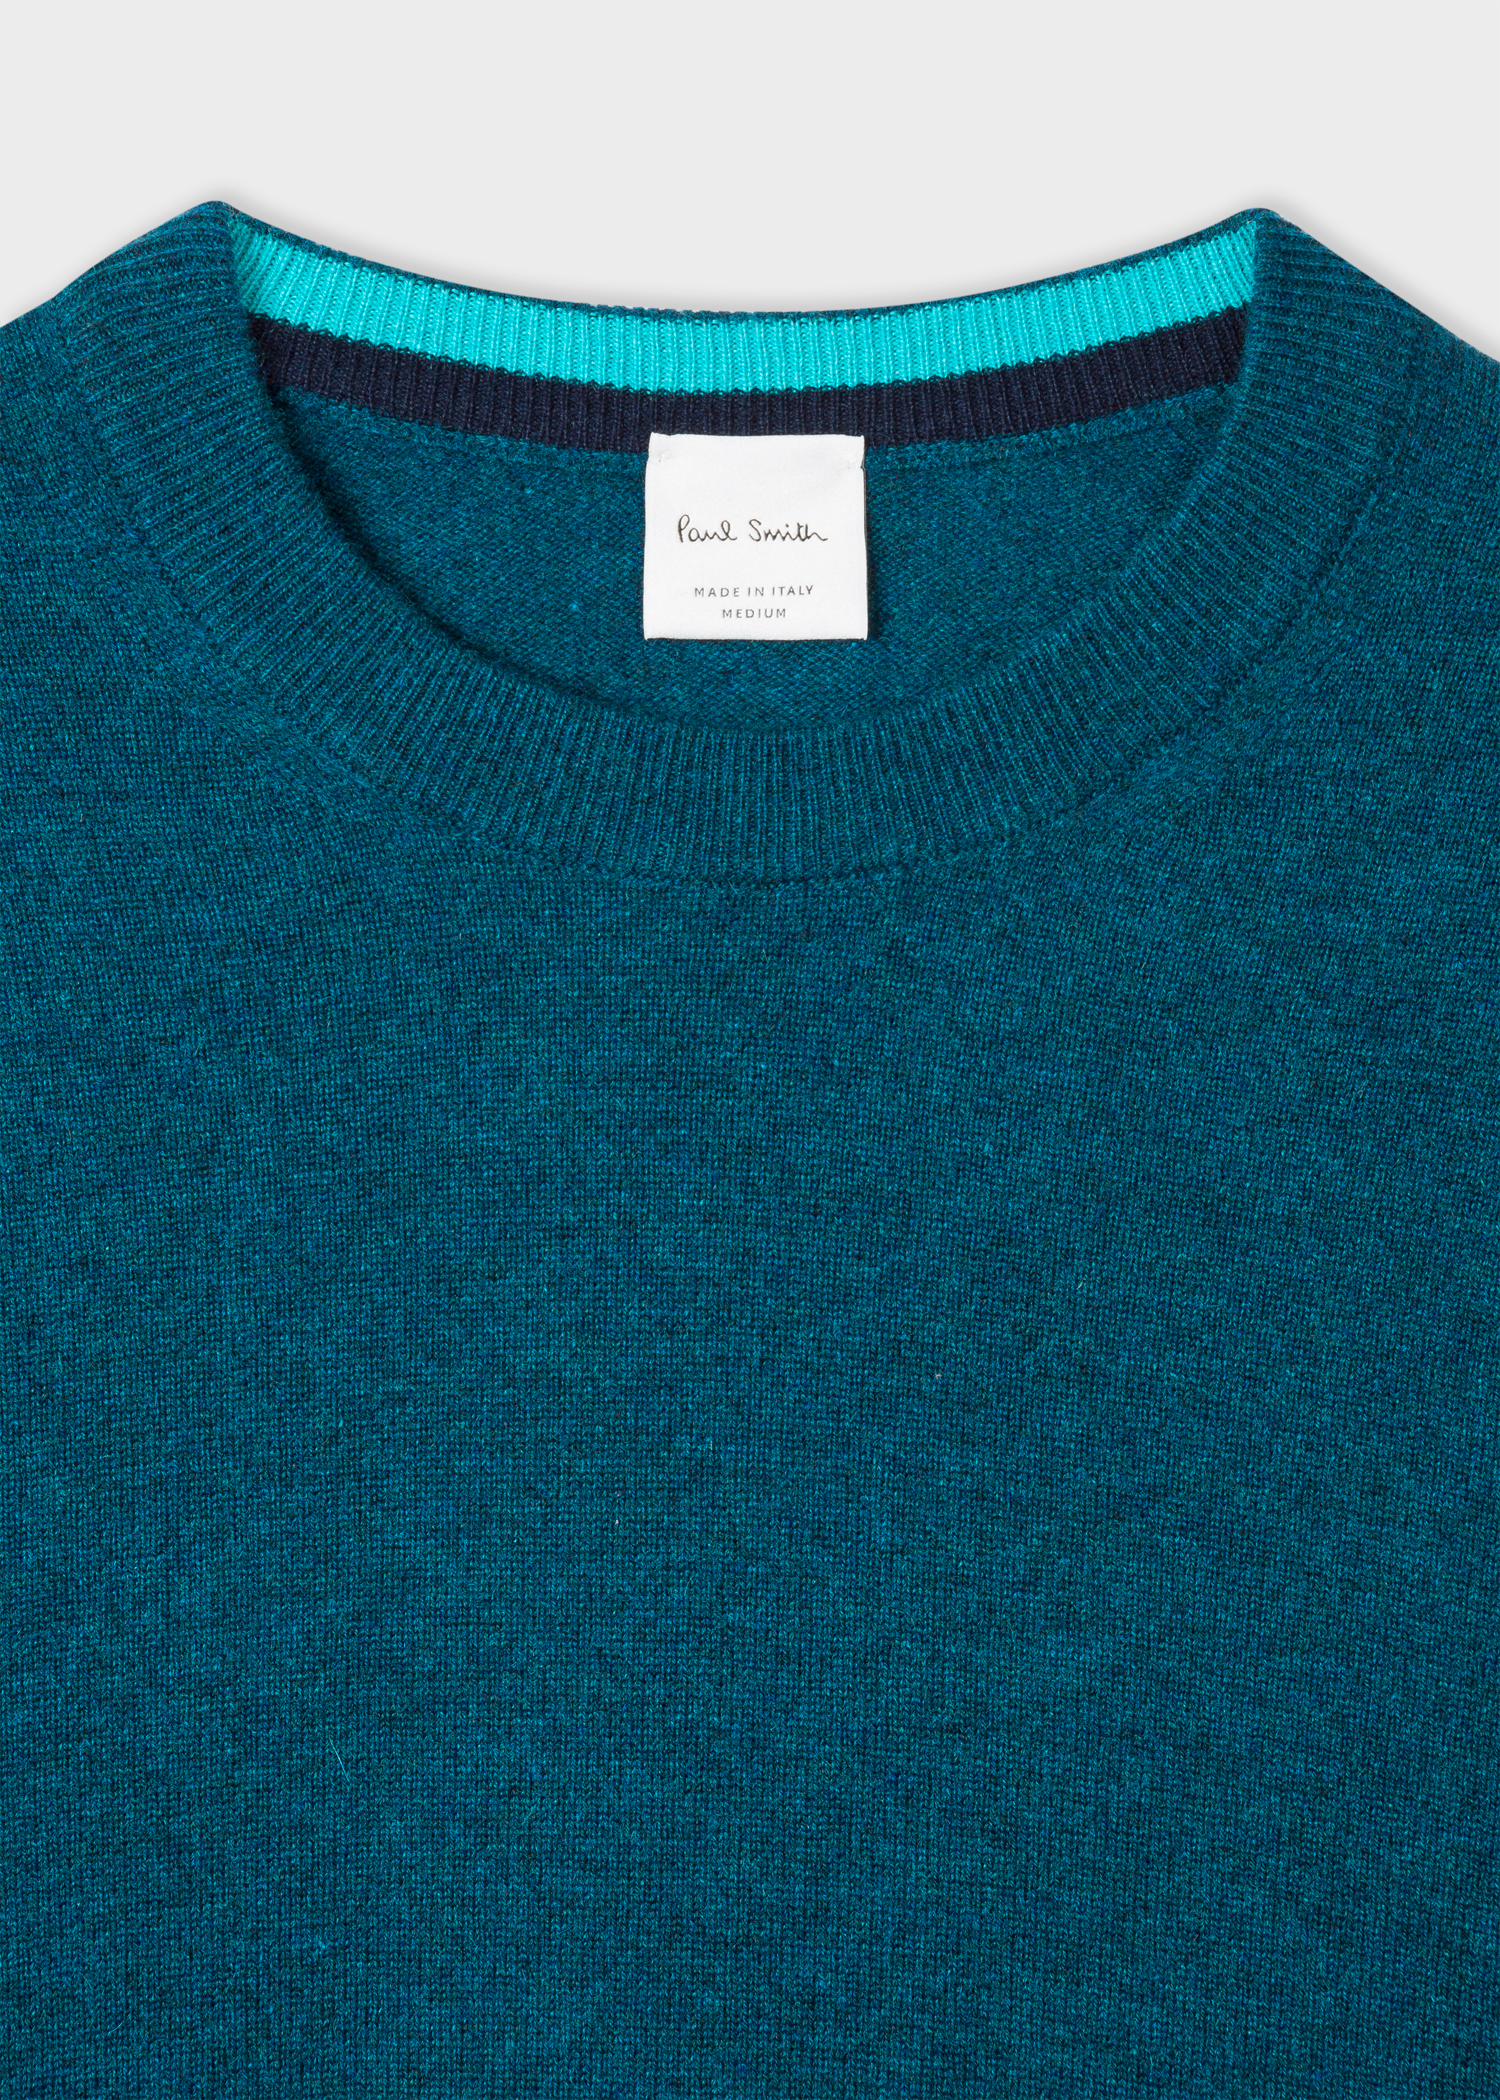 Men's Teal Cashmere Crew Neck Sweater - Paul Smith US